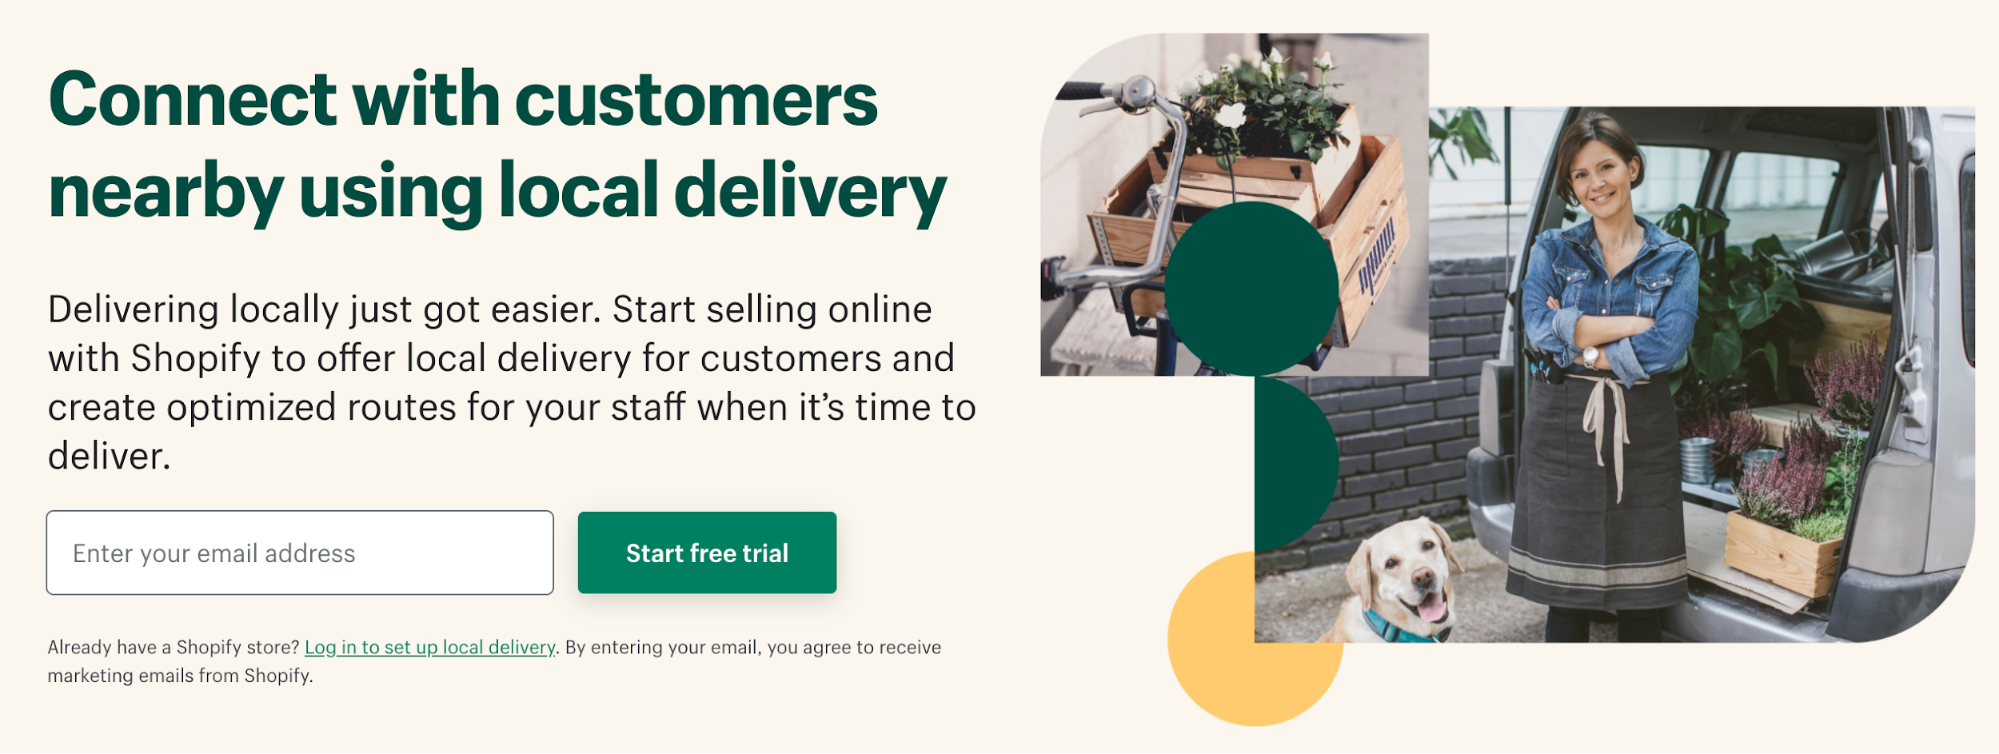 Start selling online and offer local delivery with Shopify